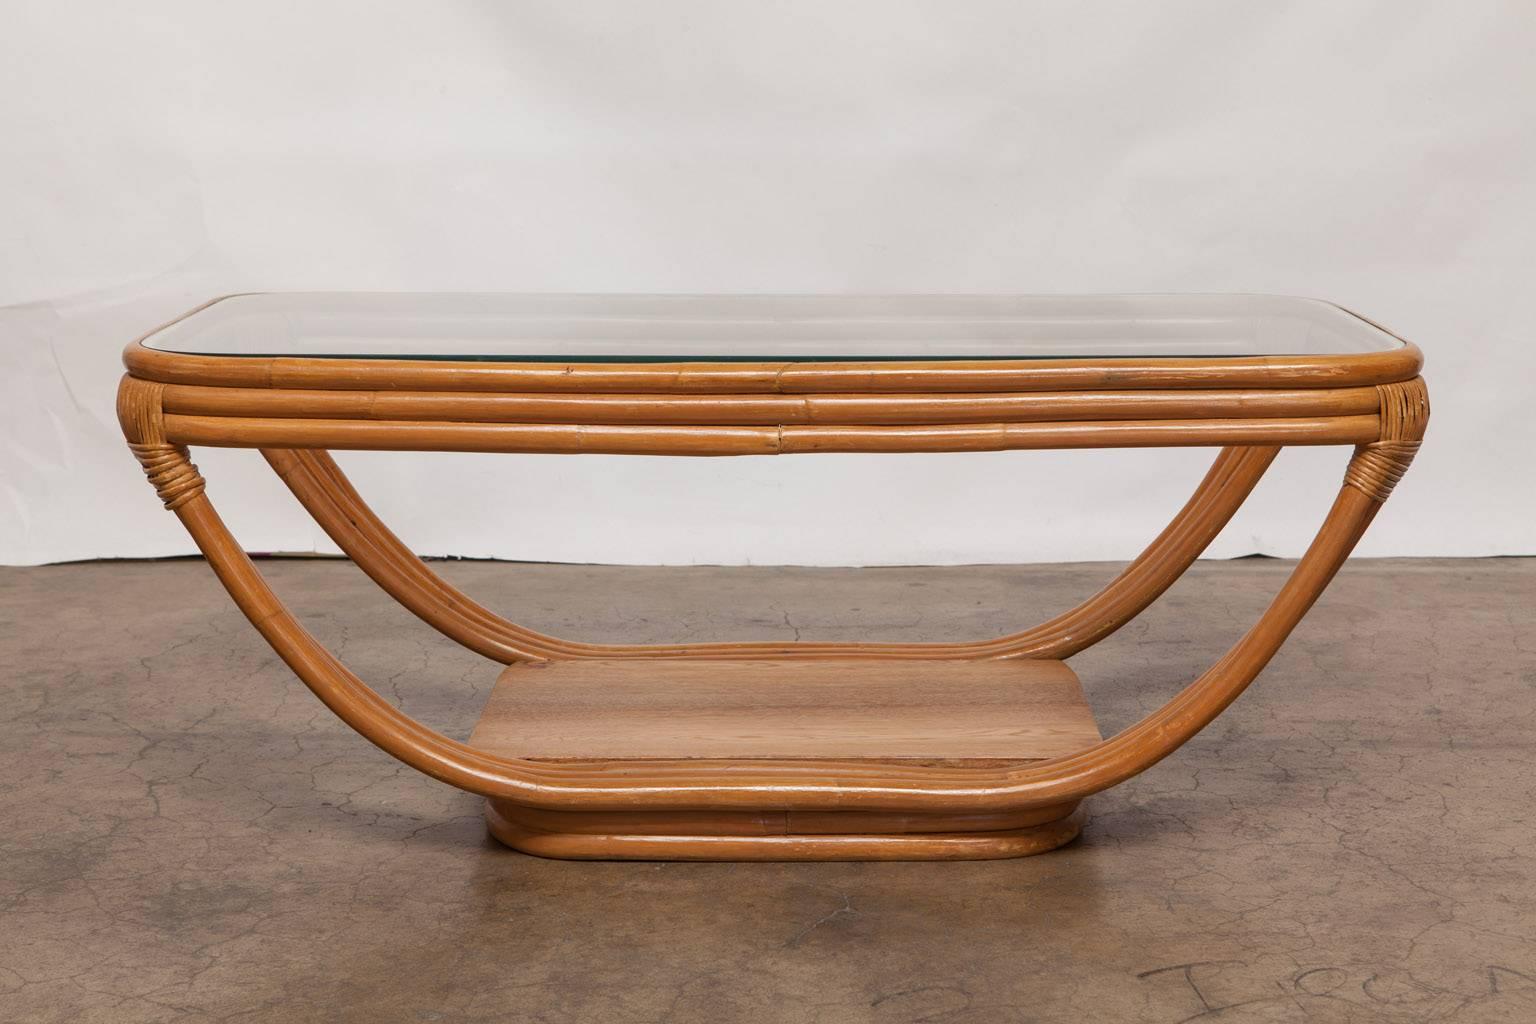 Rare rattan sculptural coffee table by Kosuga for Paul Frankl. Made in Tokyo, Japan featuring authentic steam bent rattan. Ordered from the manufacturer with original brochure. Made in the Art Deco period and purchased from the original owner.